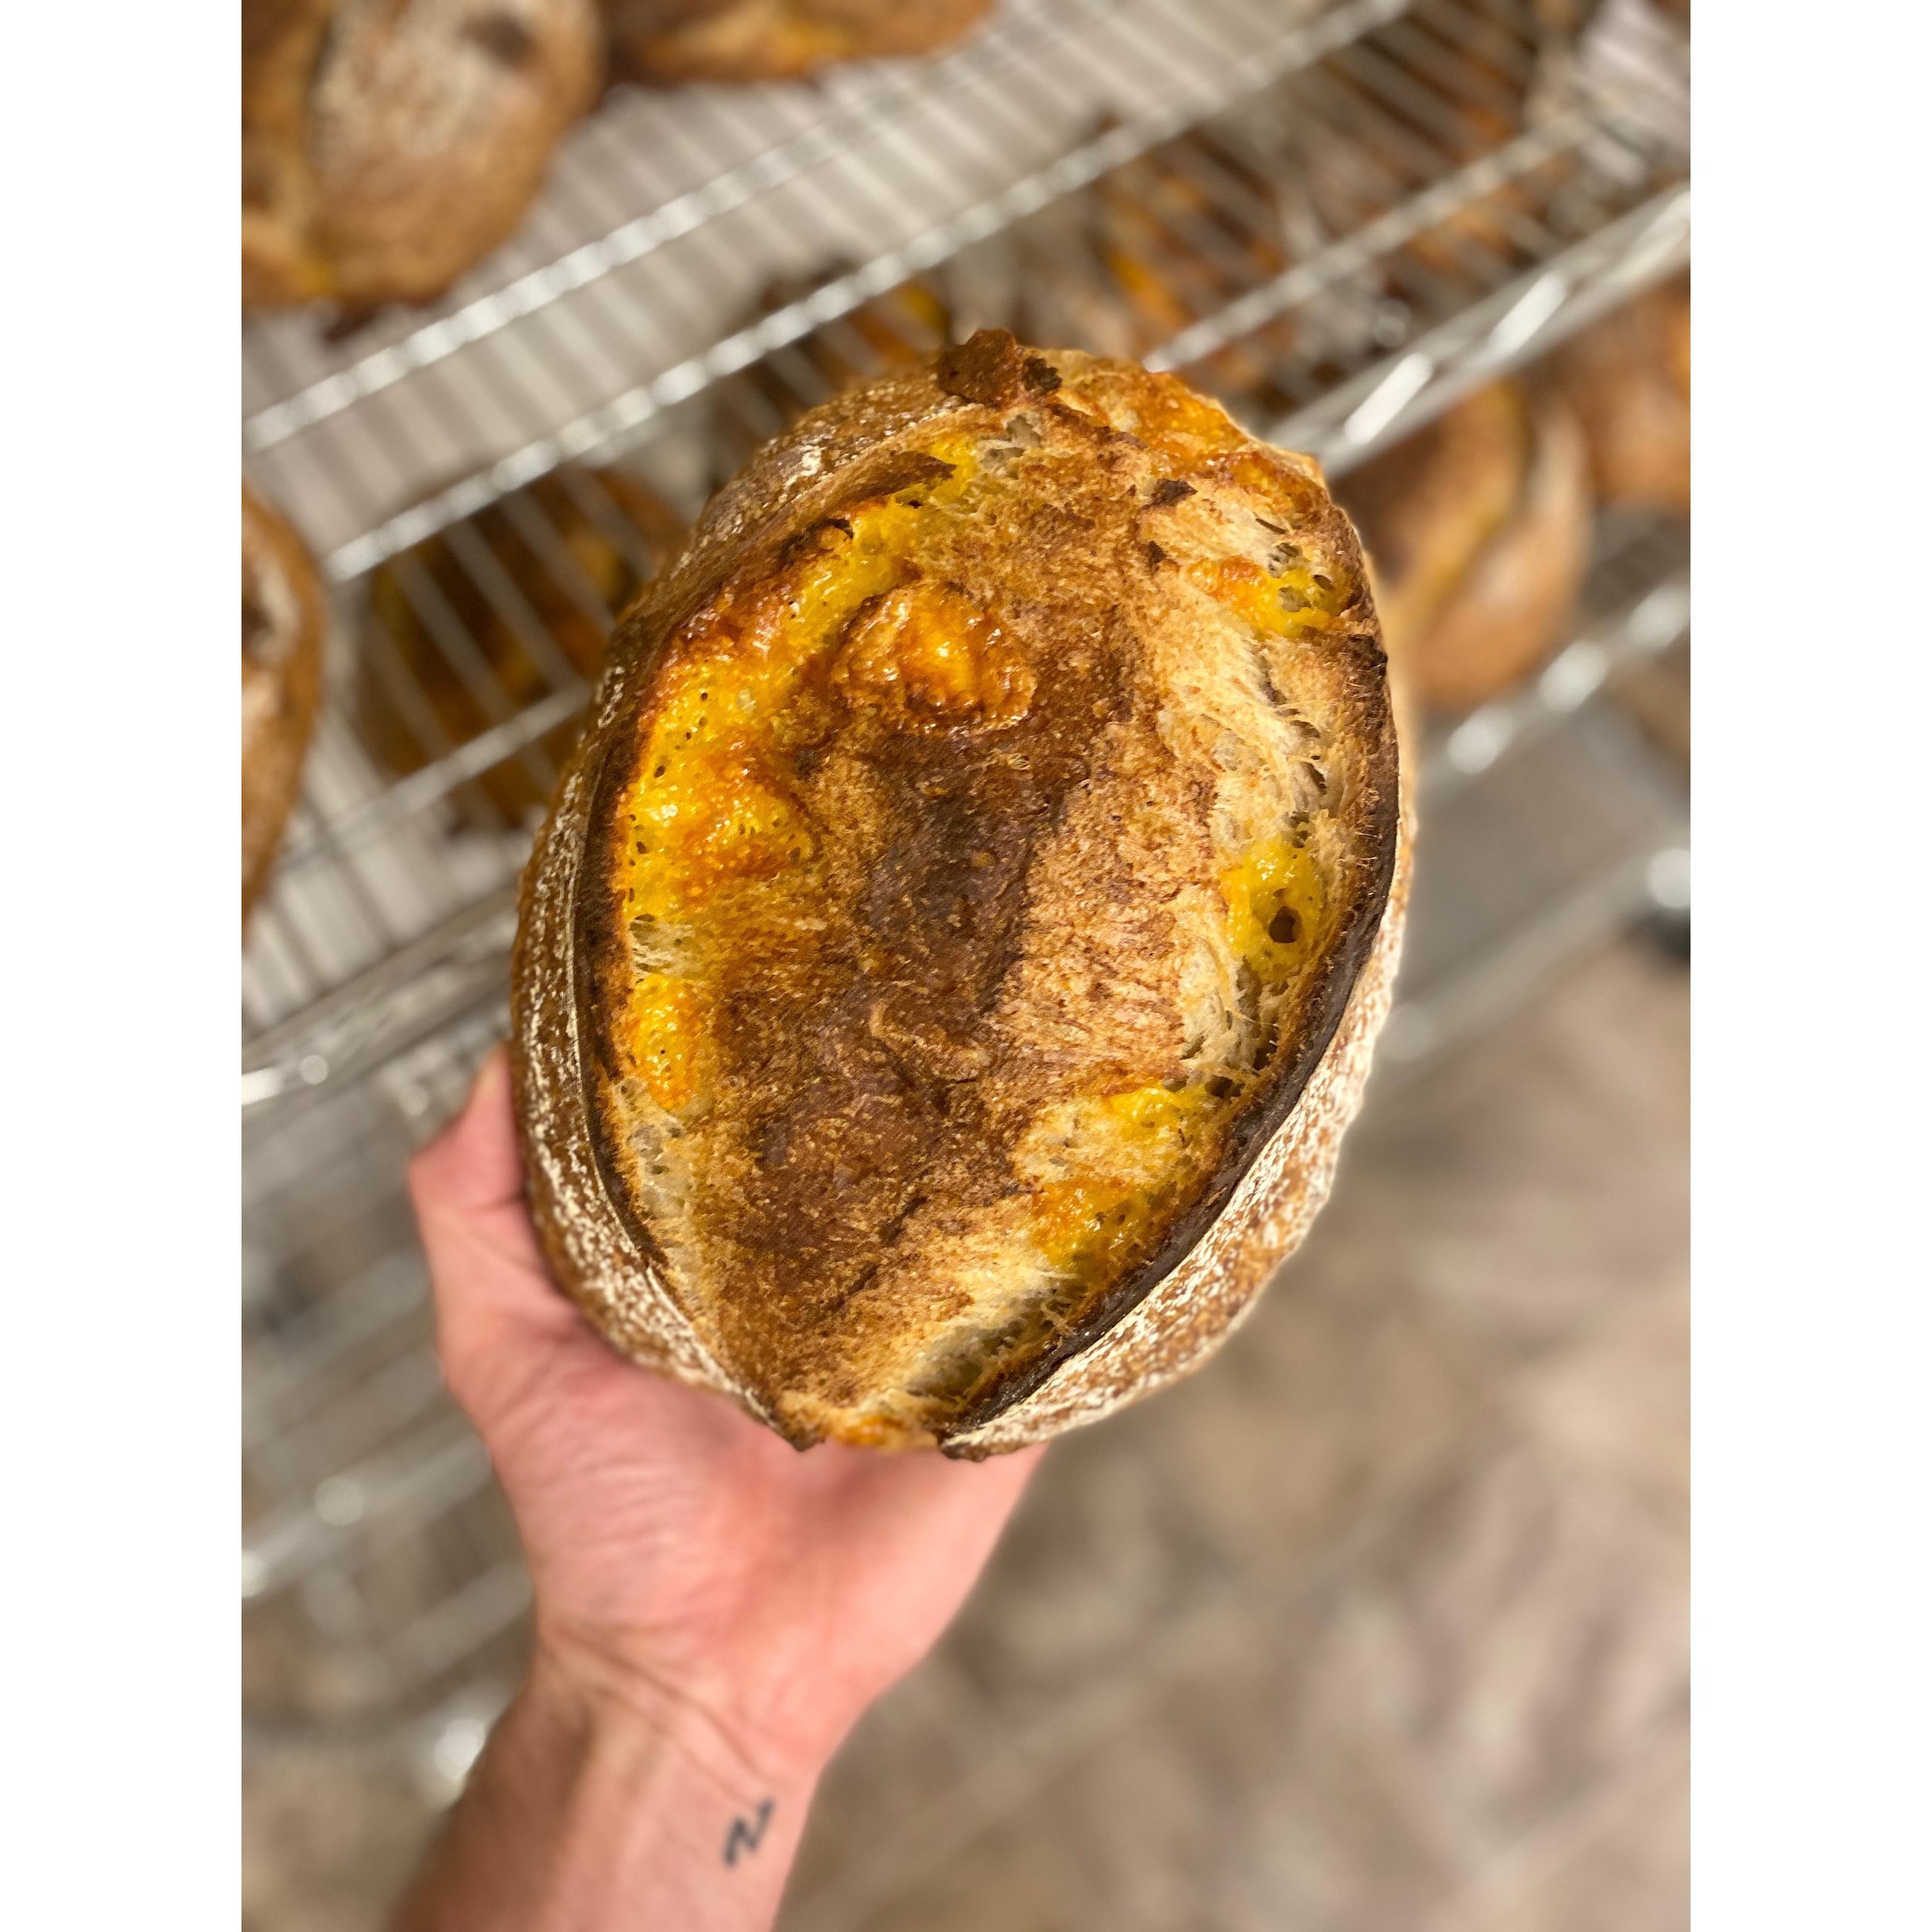 Hi friends! Bread is live for the upcoming week with Roasted Garlic Cheddar &amp; Herb, Bagels, Olive &amp; Herb and more! Check it out at sprucehousebread.com (link in bio)